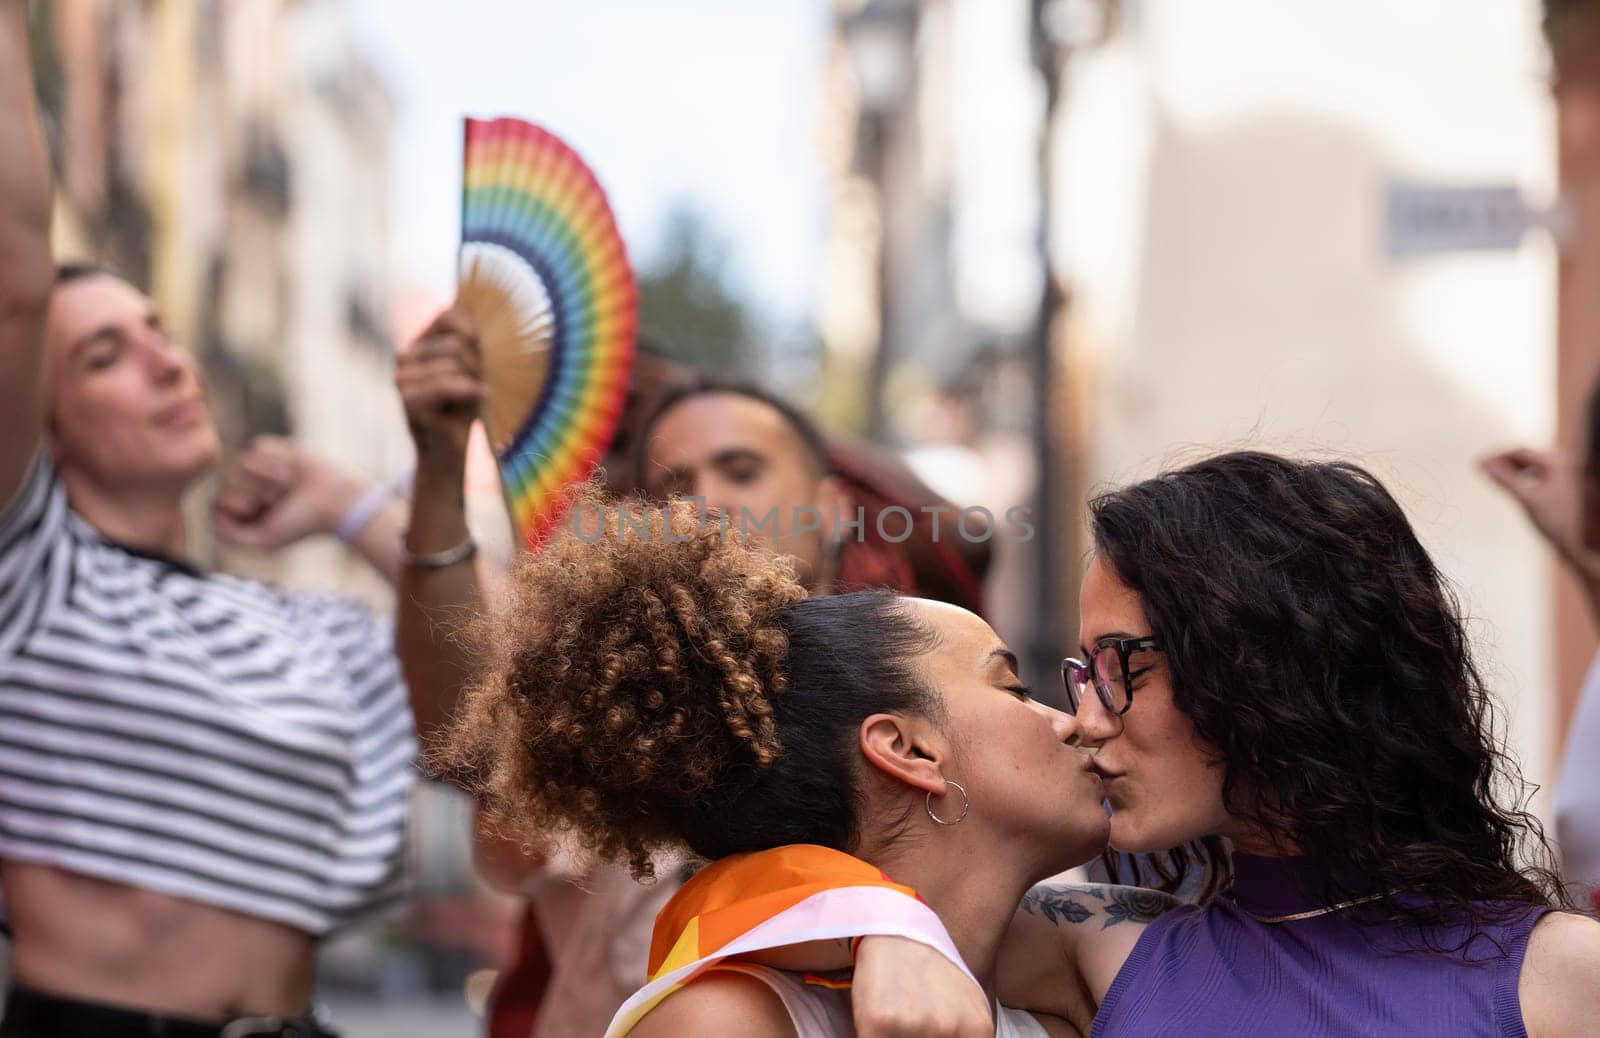 Group of LGBTQ people enjoy a pride event or parade celebration to support their community and moving towards equality by papatonic